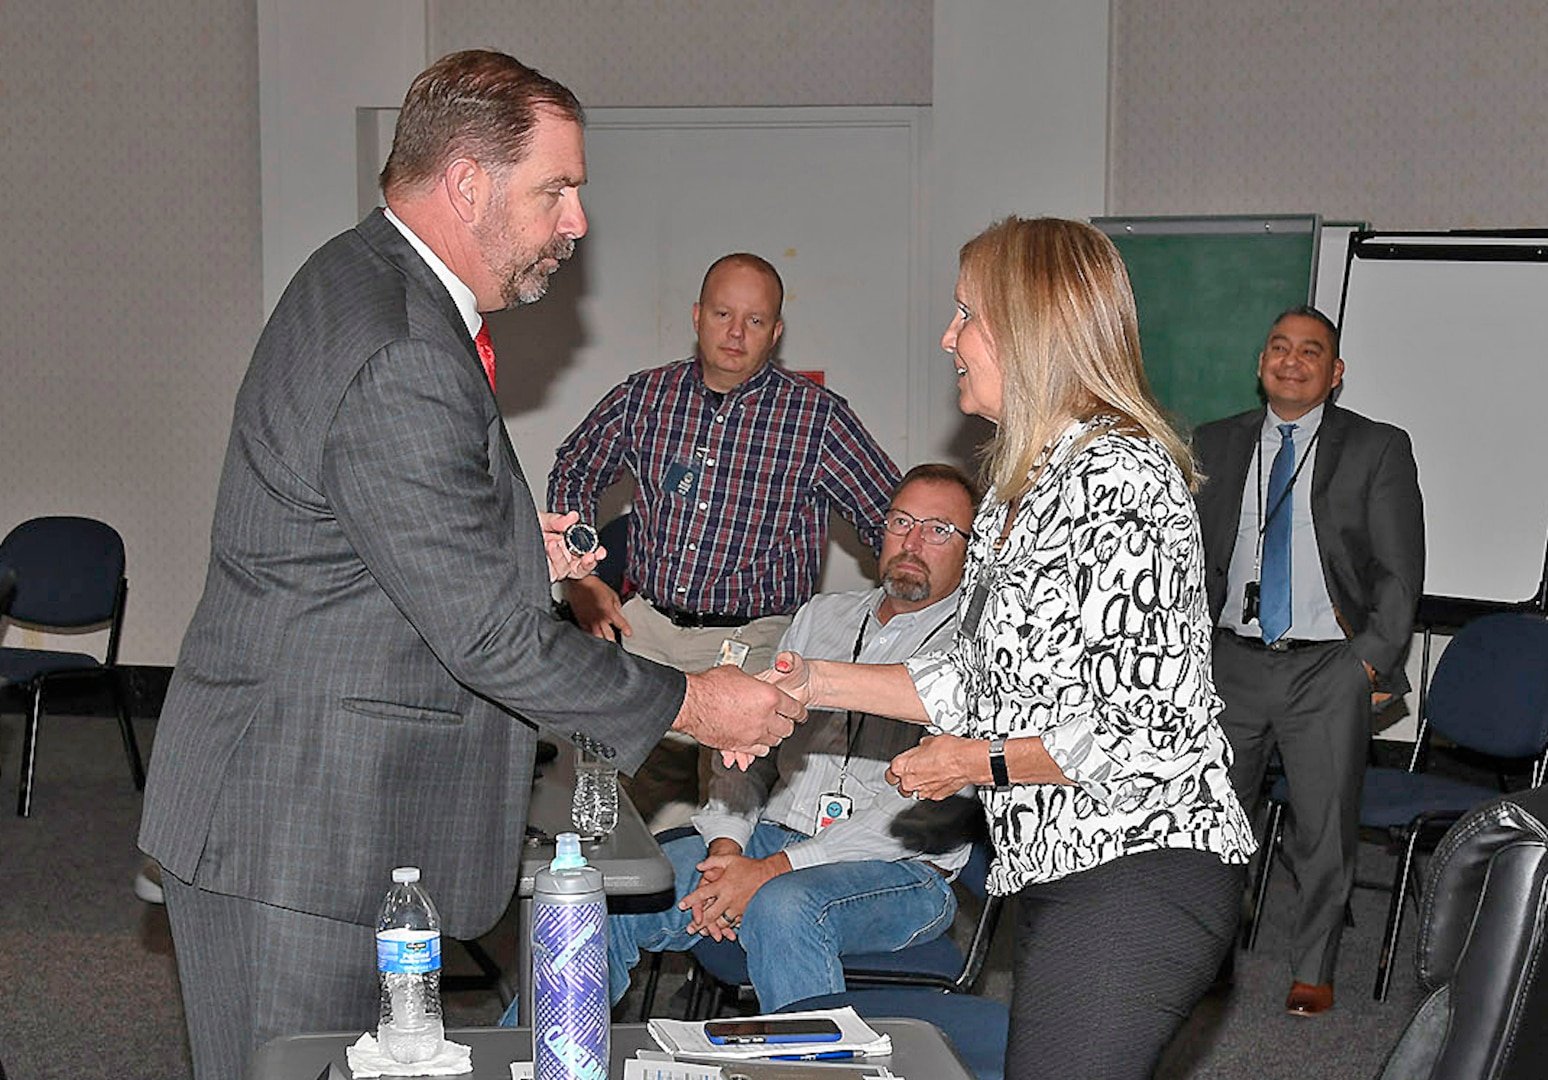 DLA Disposition Services Director Mike Cannon "coins" GSA Southwest Central Branch Chief Ericka Grim during a combined DLA-GSA sales contracting officer training event.